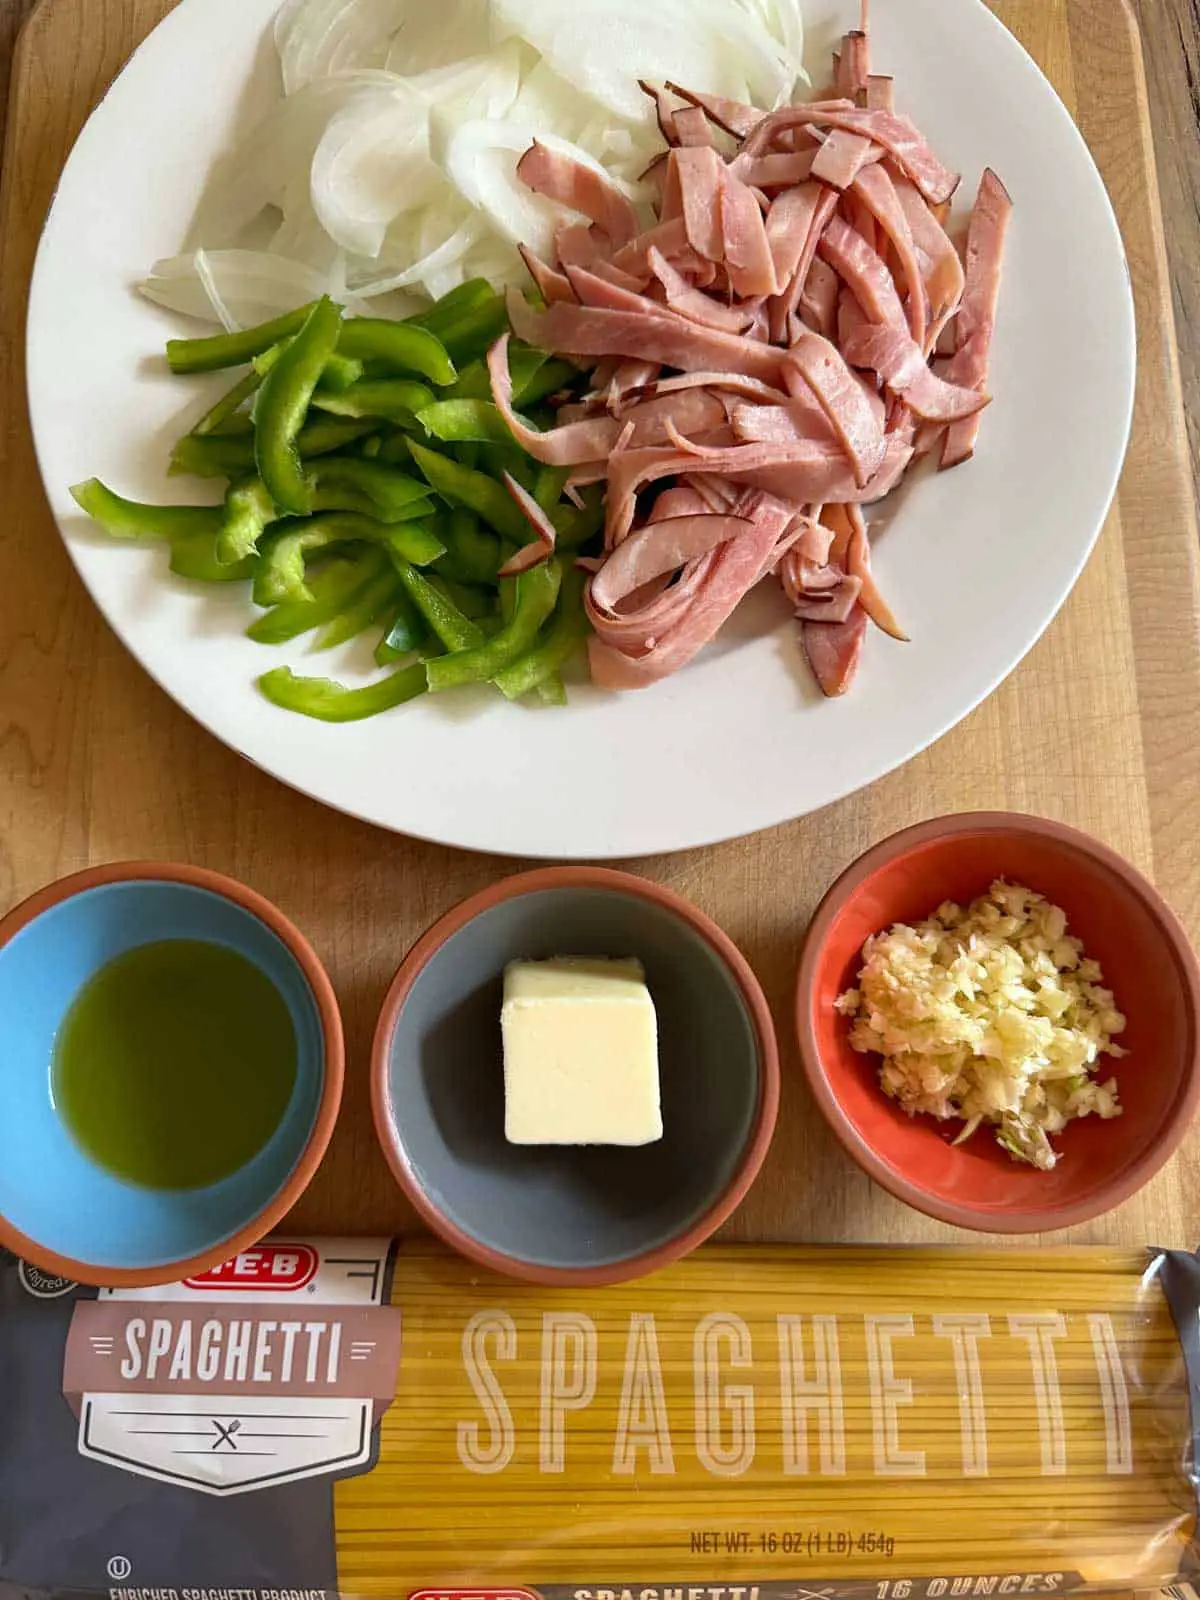 A white plate containing slices of ham, green bell pepper and onion. A bag of spaghetti and bowls containing olive oil, butter, and minced garlic.